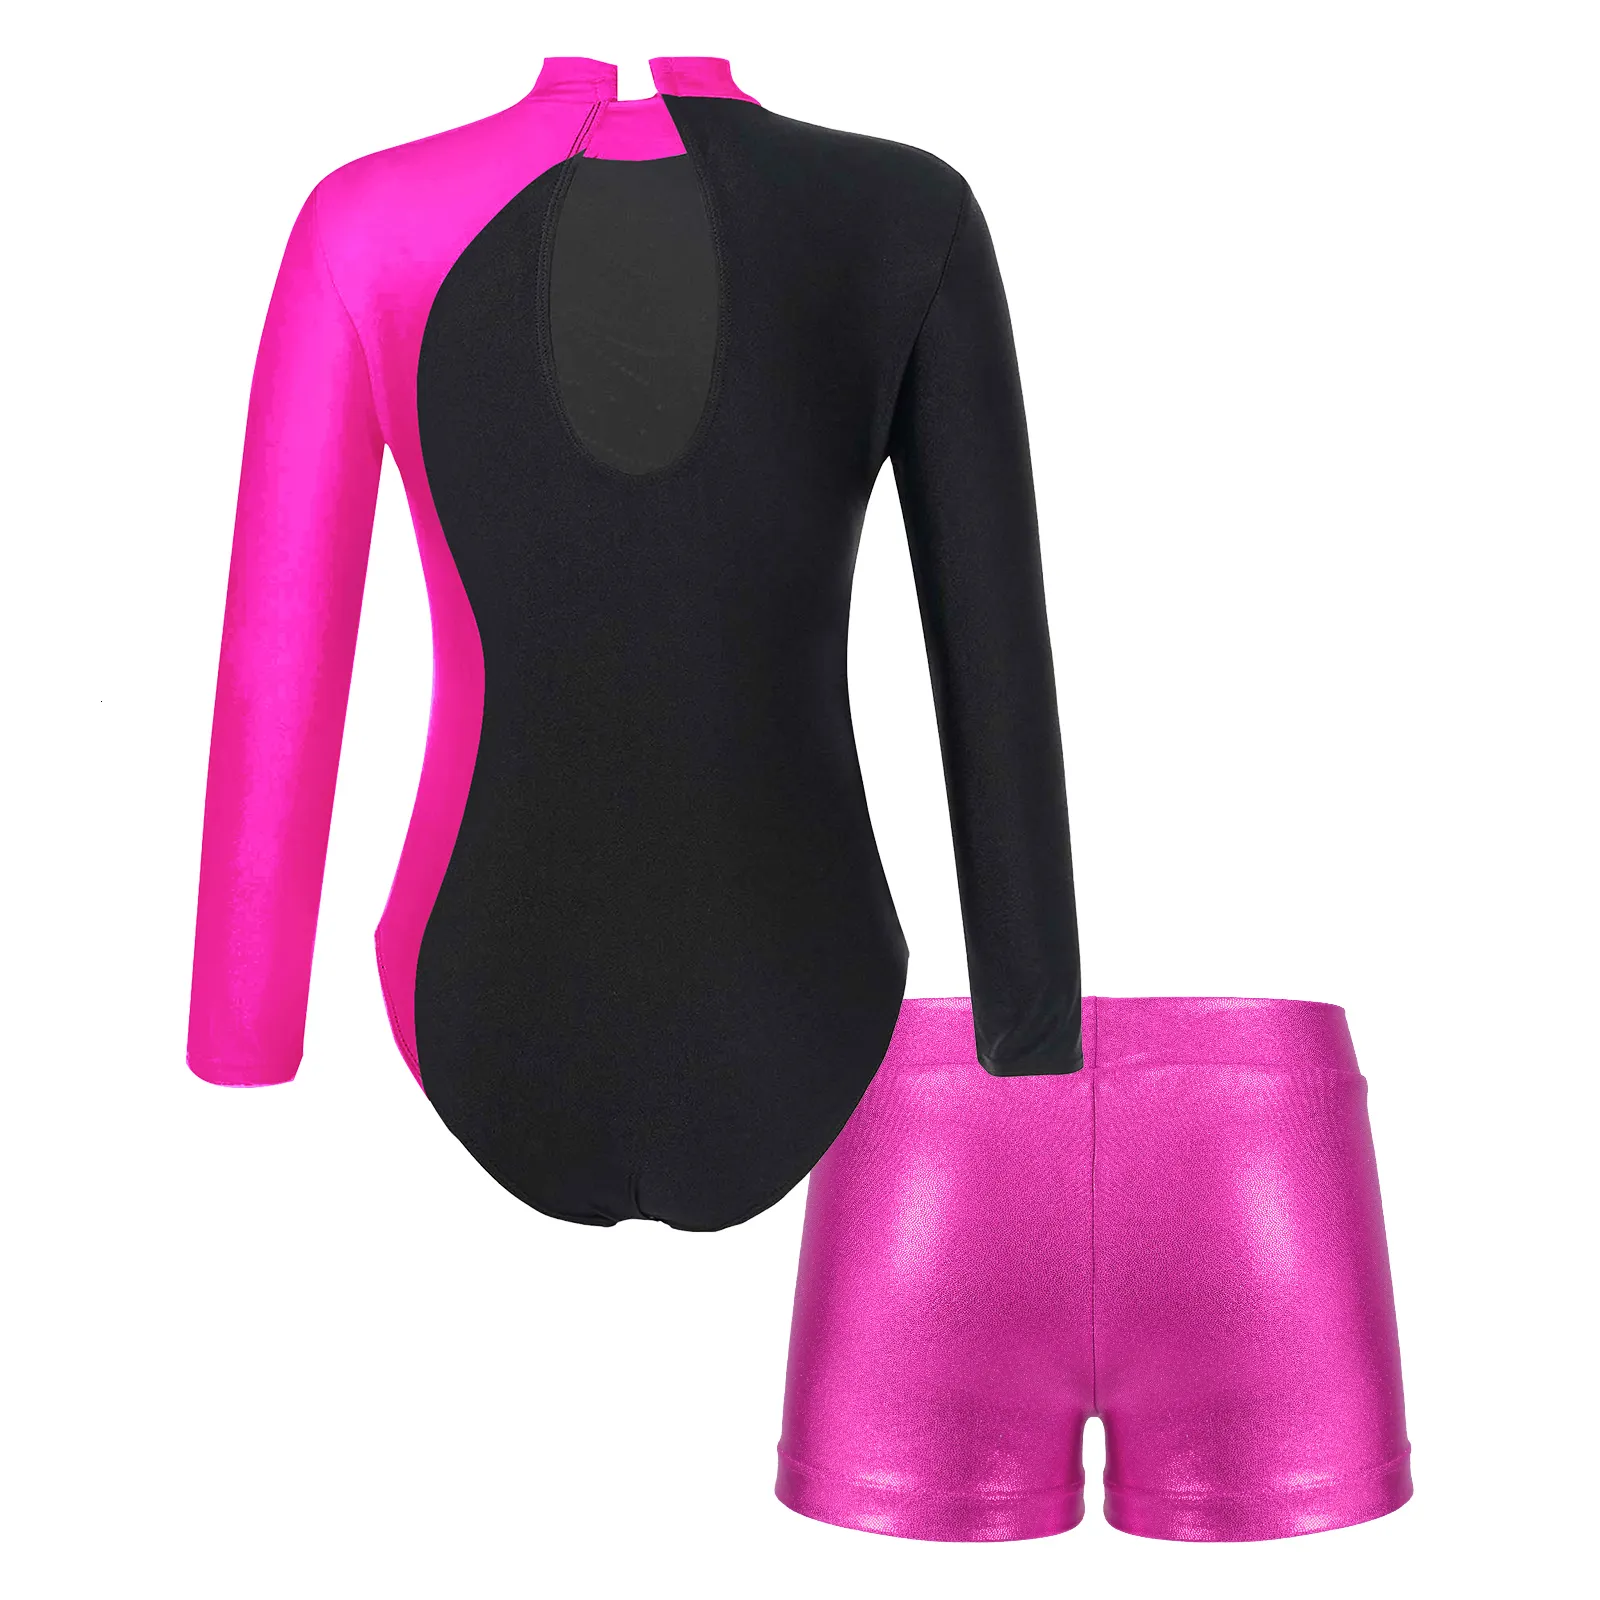 Girls Long Sleeve Ballet Dance Outfit With Pole Dance Shorts